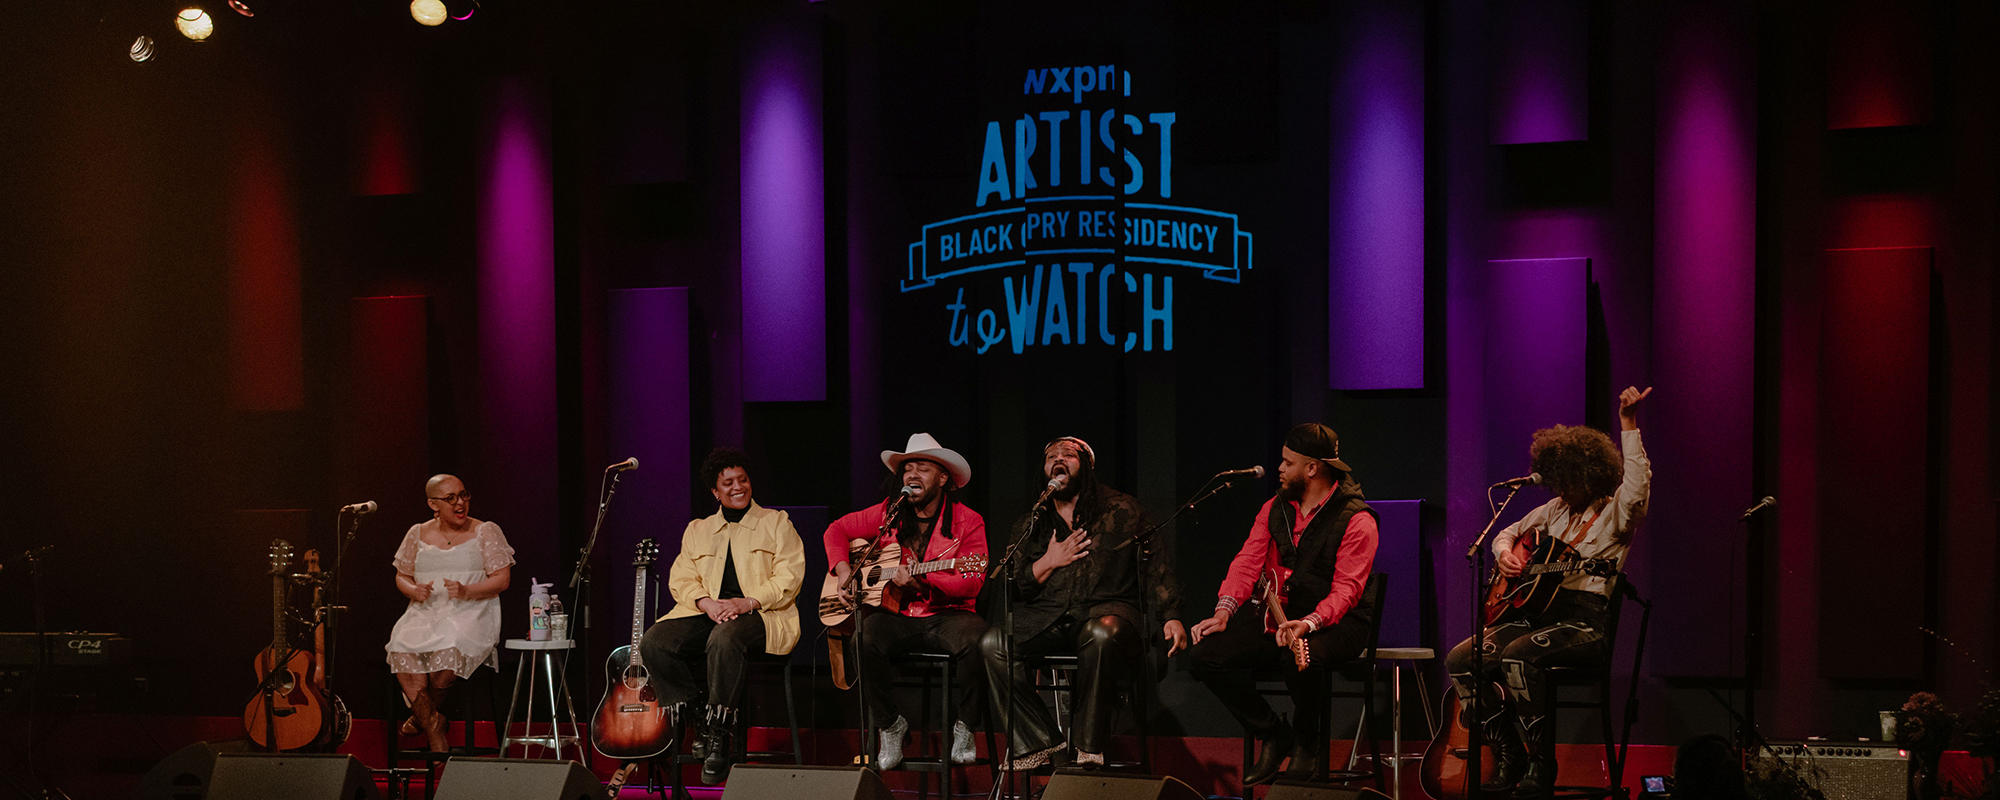 Black Opry and Public Radio Station WXPN Work to Create Equity for Artists of Color